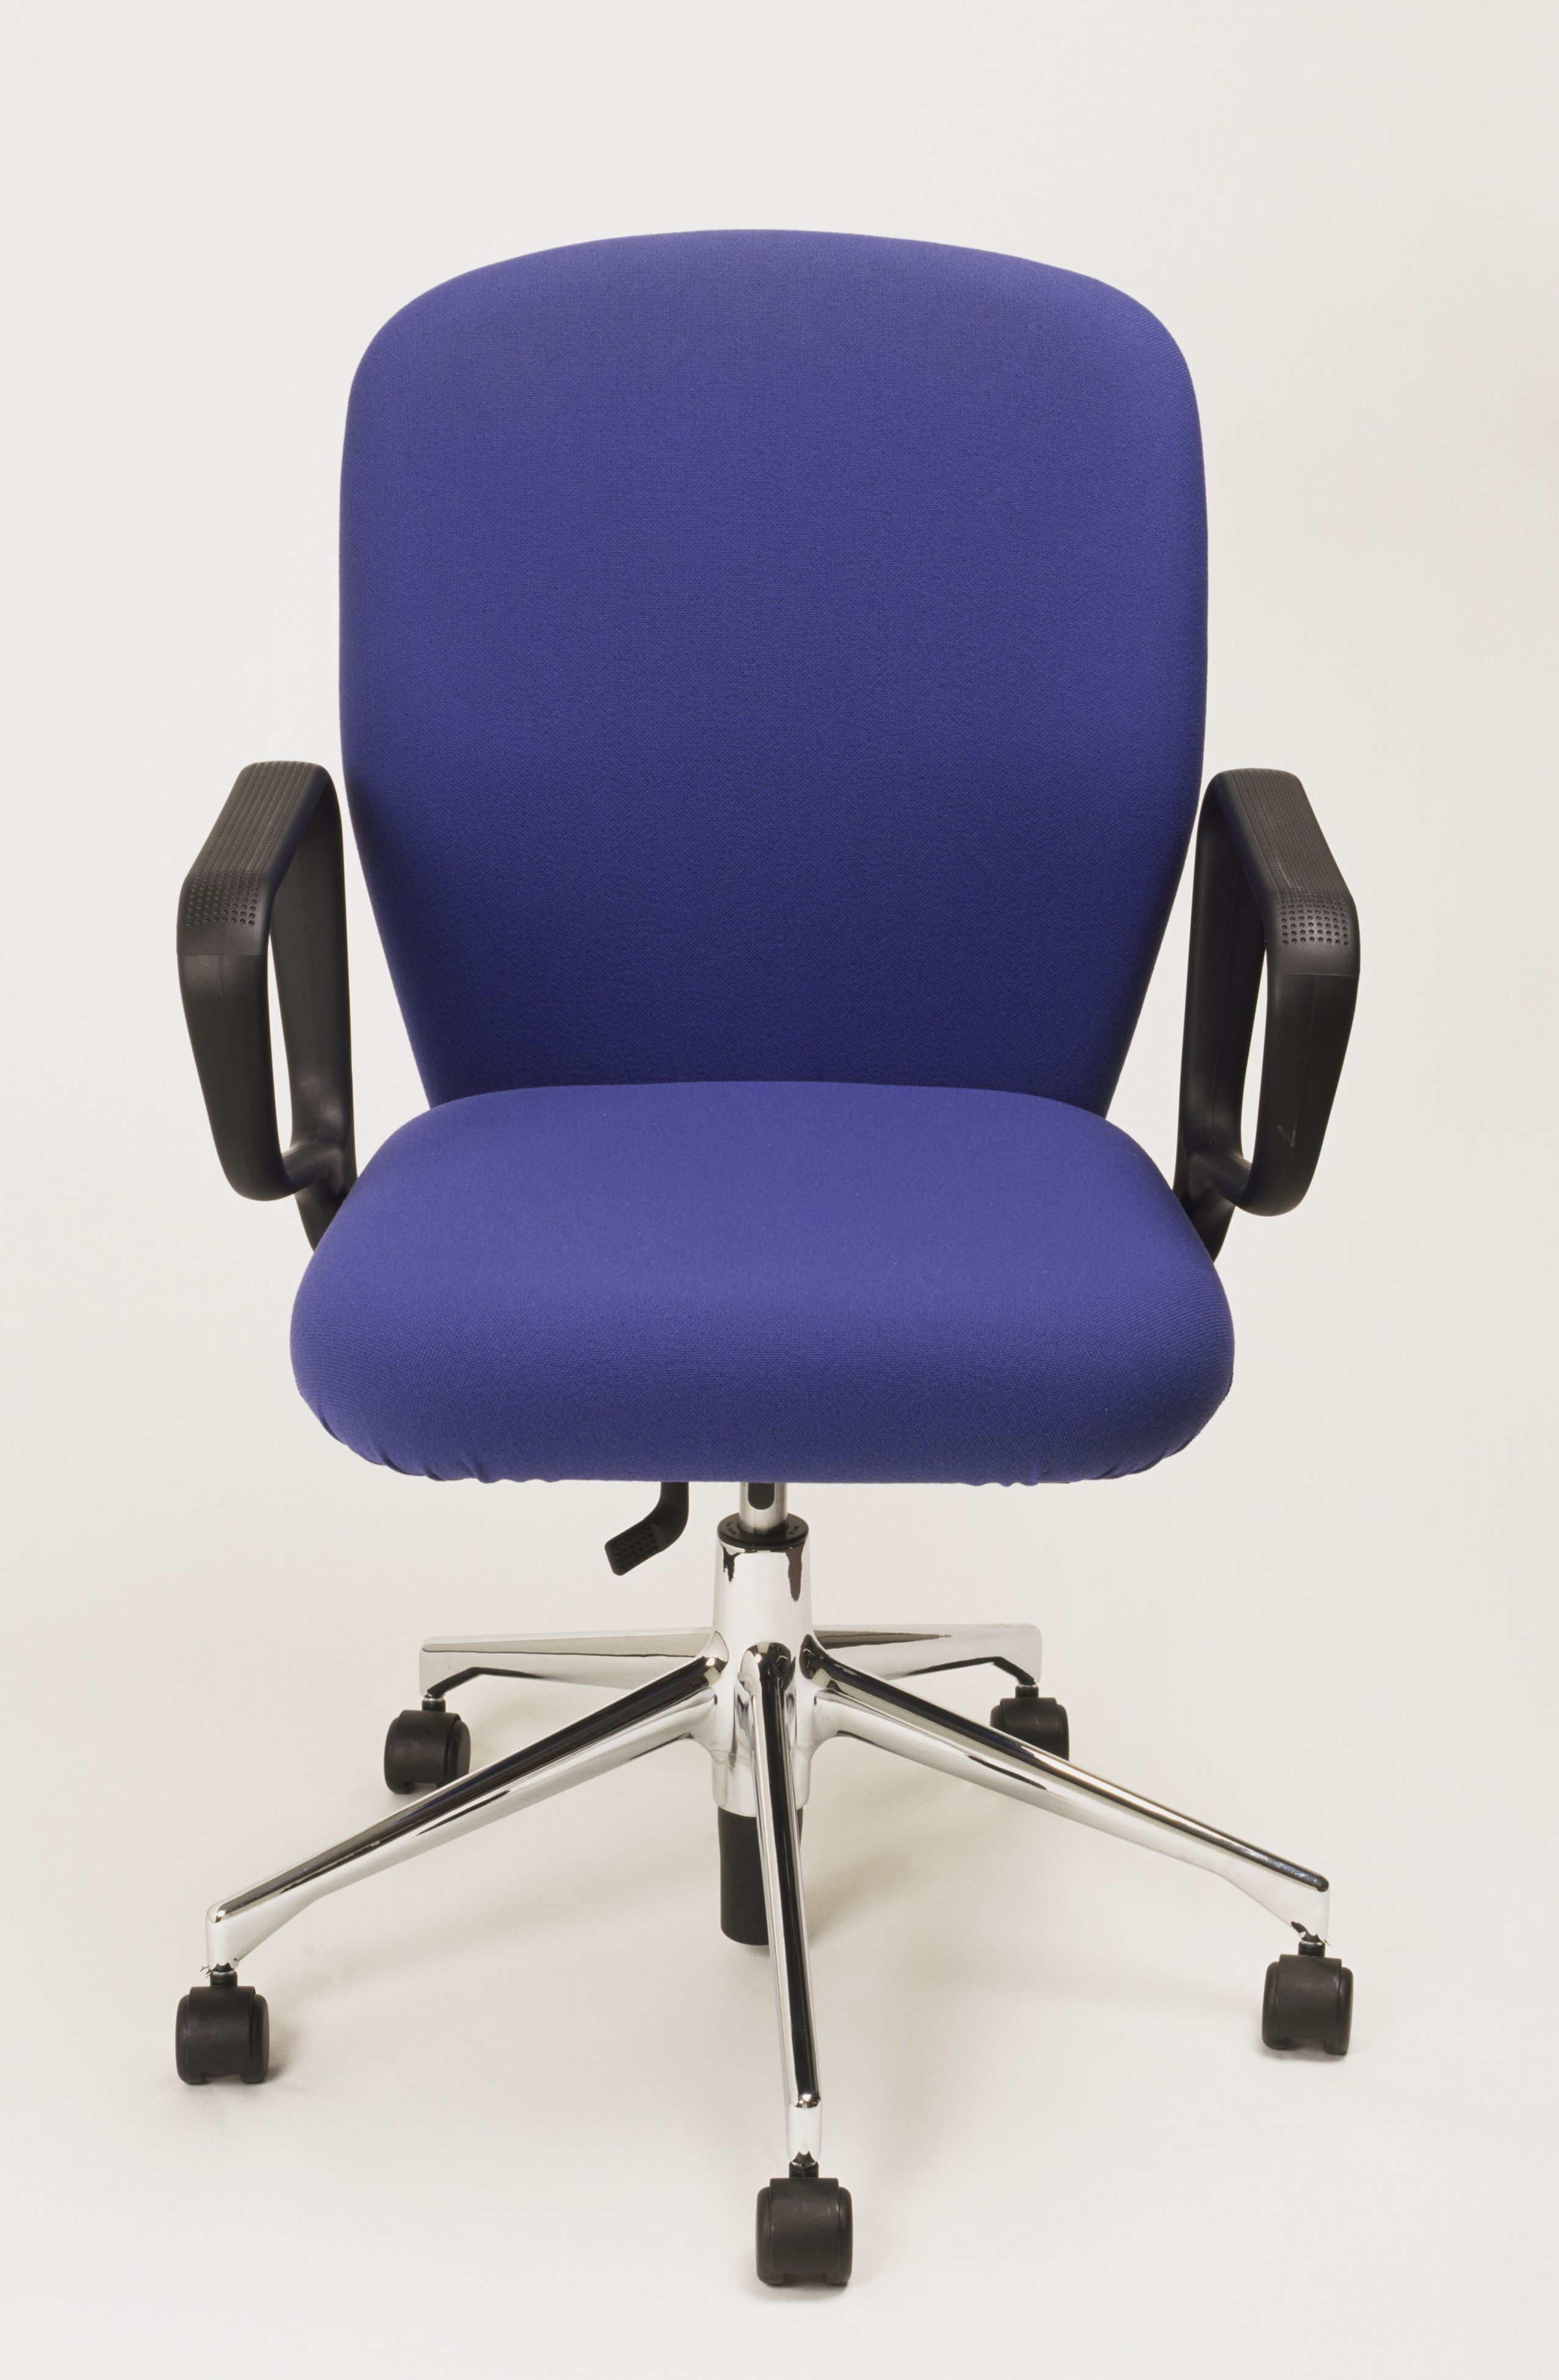 Seat Depth Adjustments on Your Office Chair